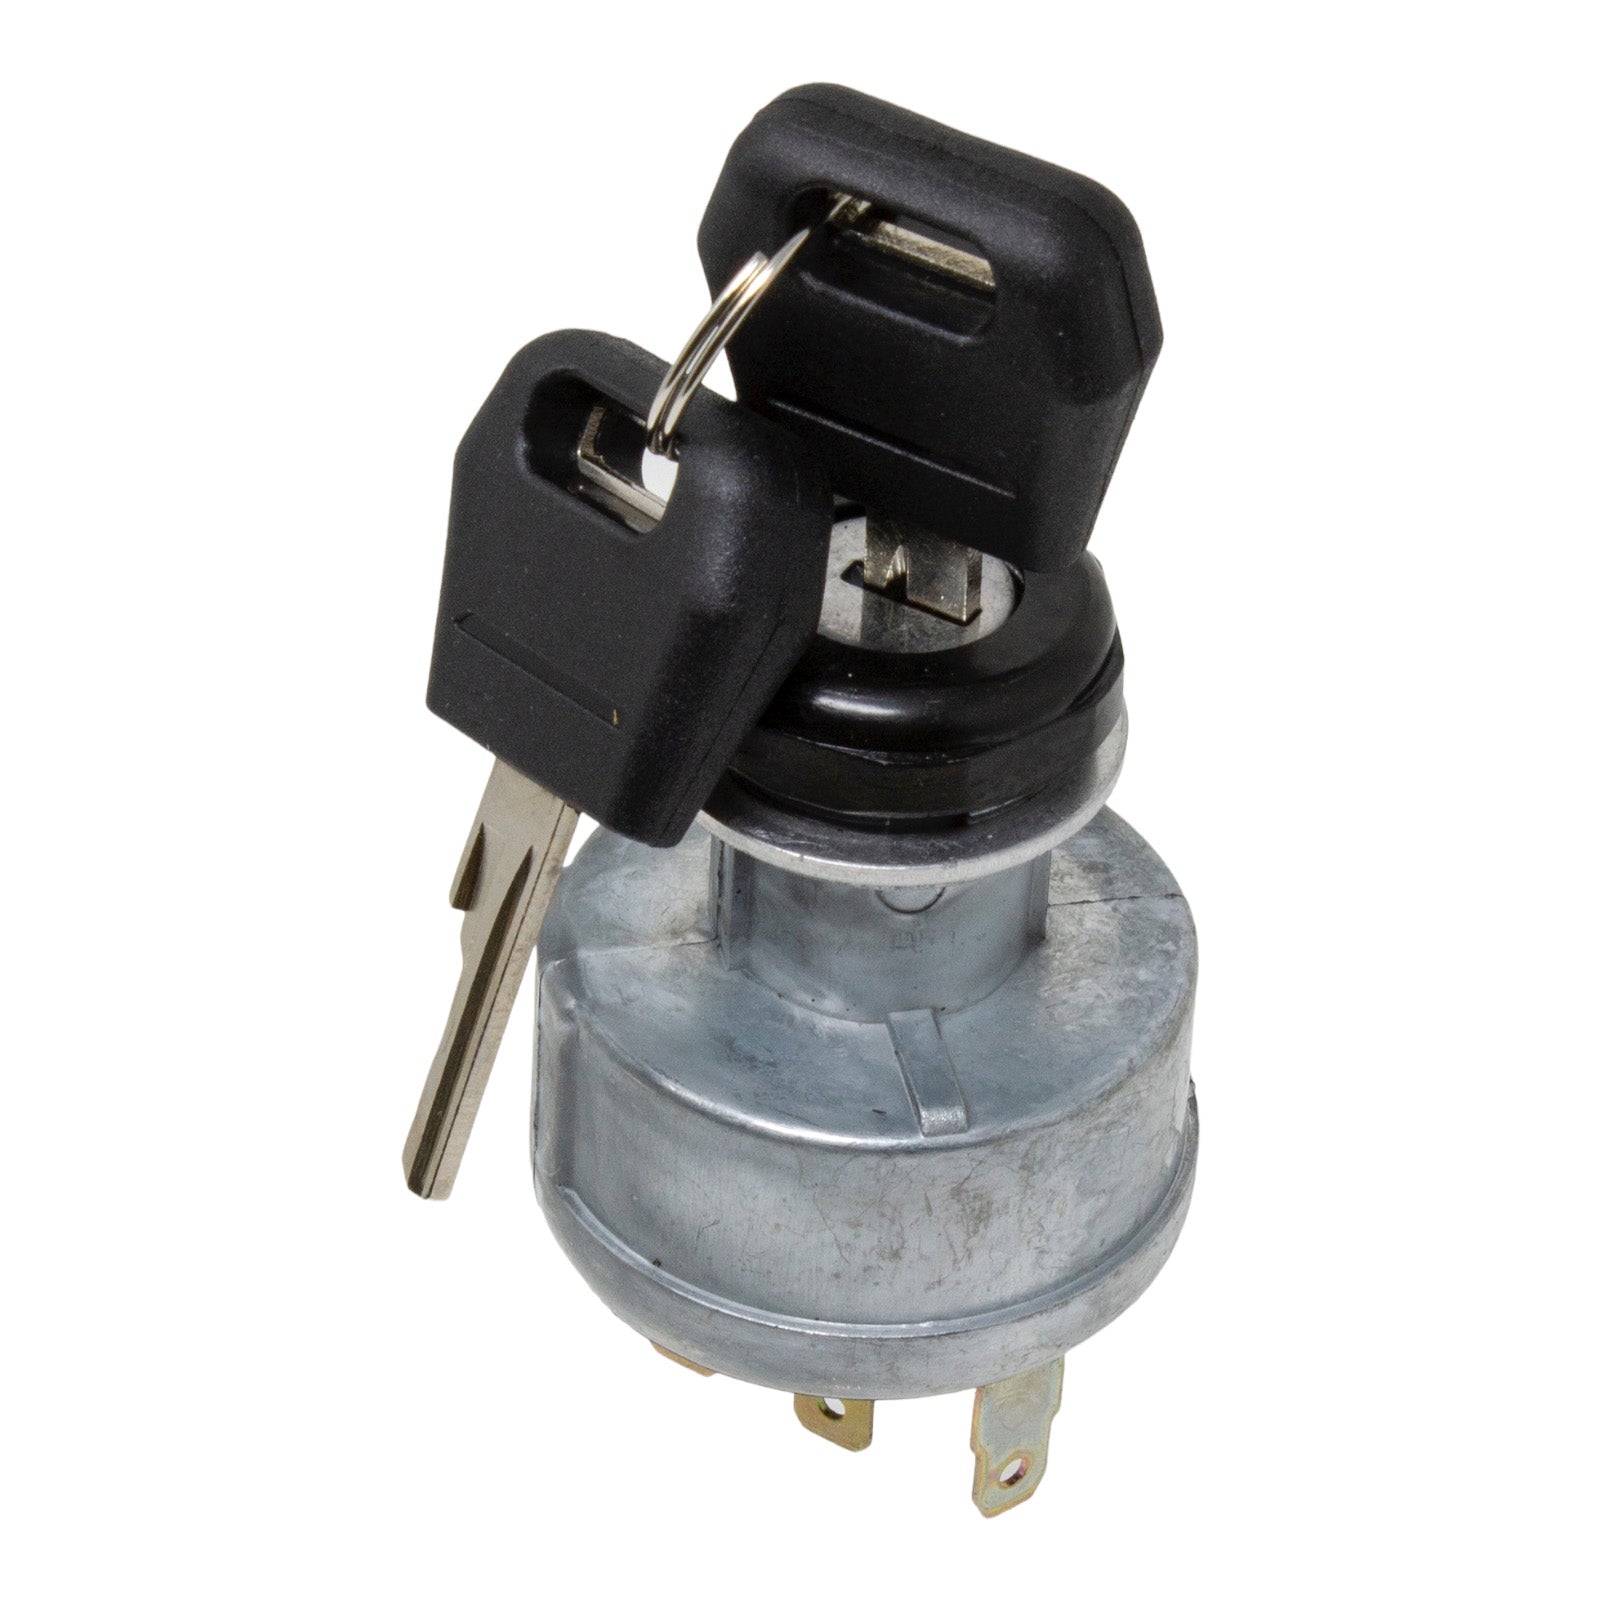 Duraforce R57312, Ignition Switch For Case IH